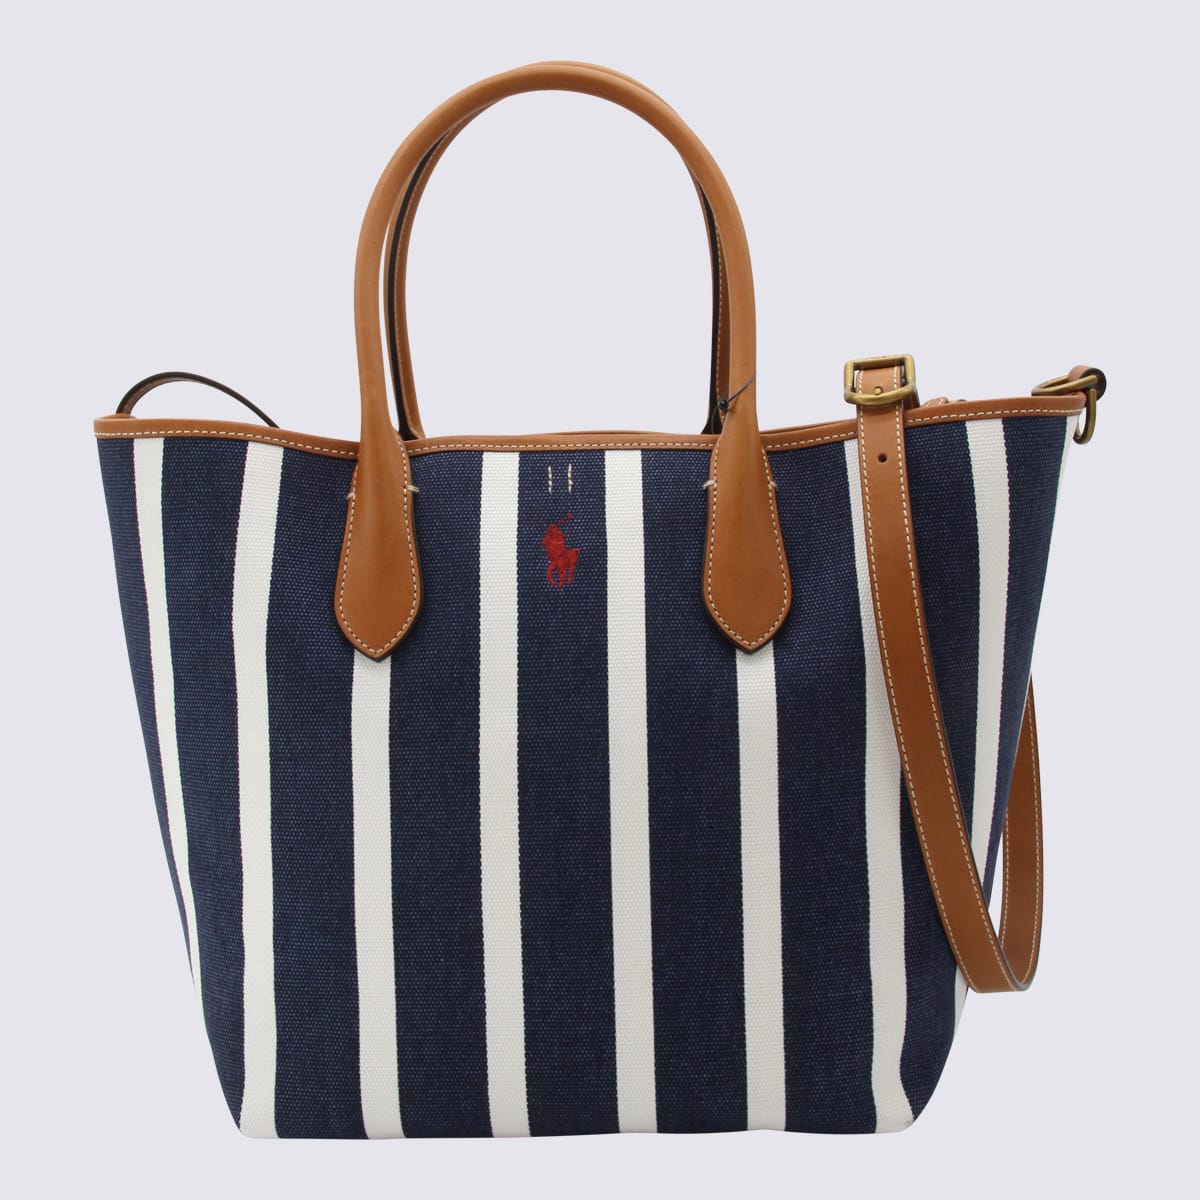 Polo Ralph Lauren Blue And White Cotton Tote Bag In Newport Navy/white